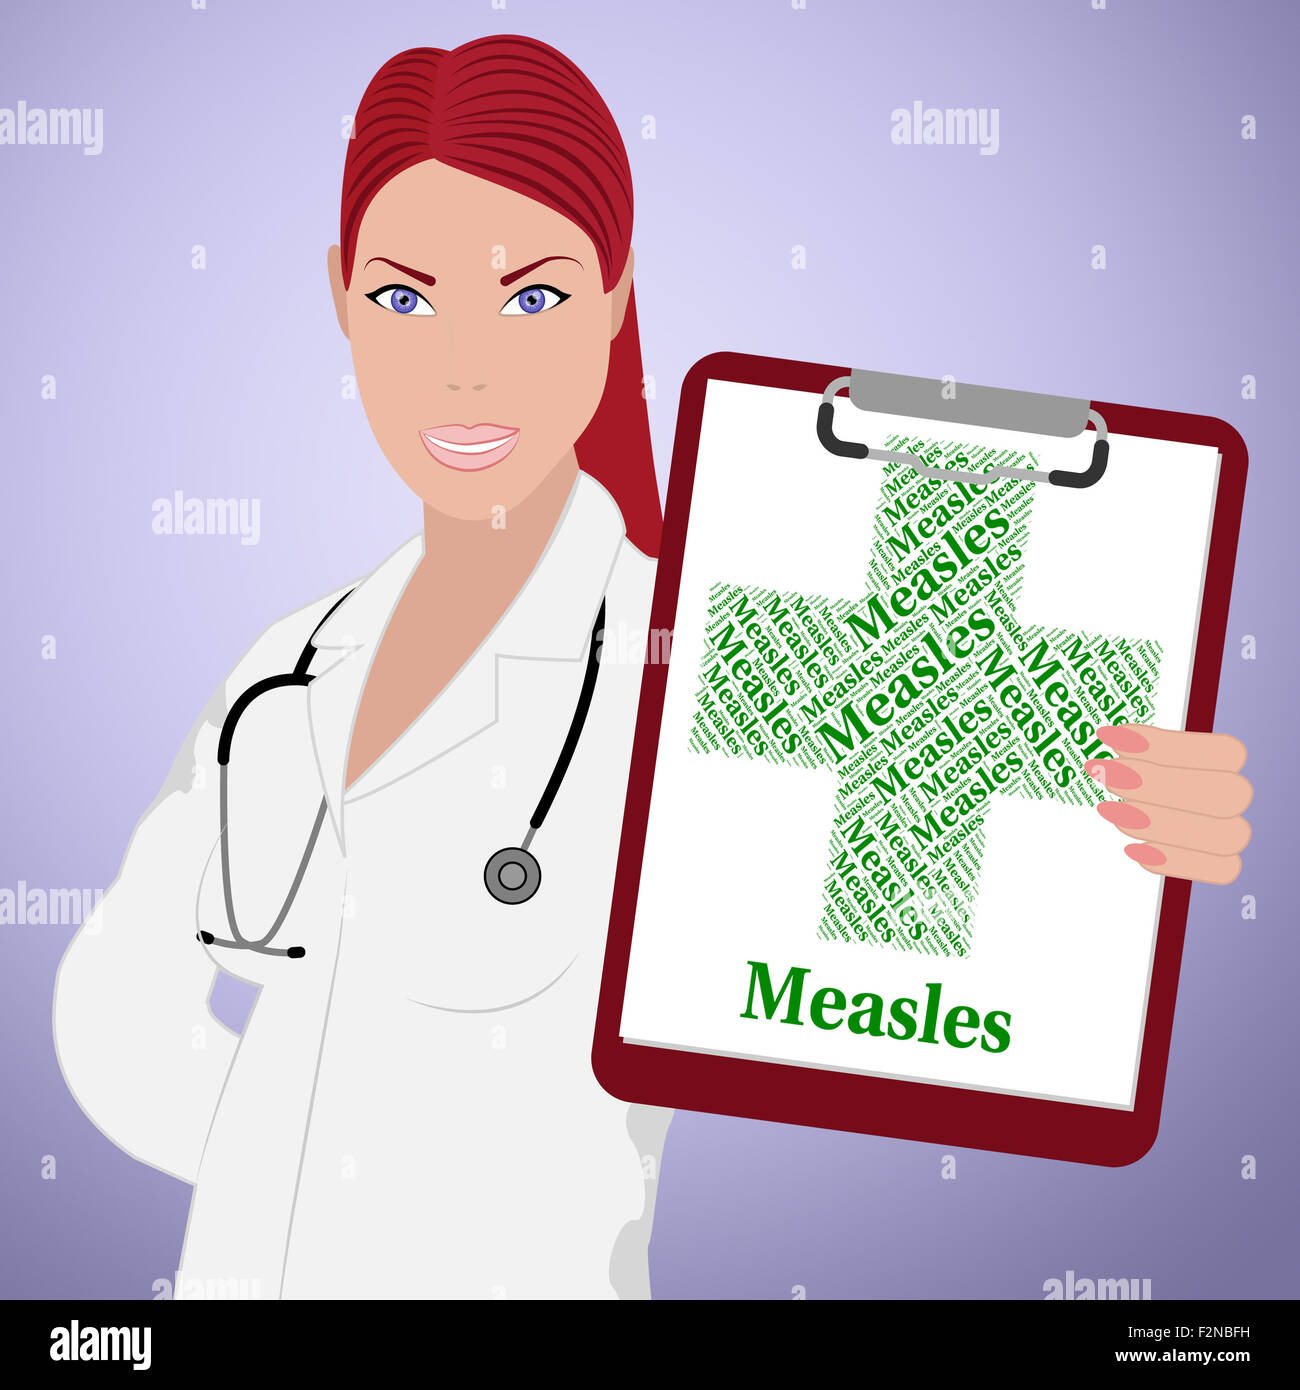 Measles Word Showing Poor Health And Ill Stock Photo